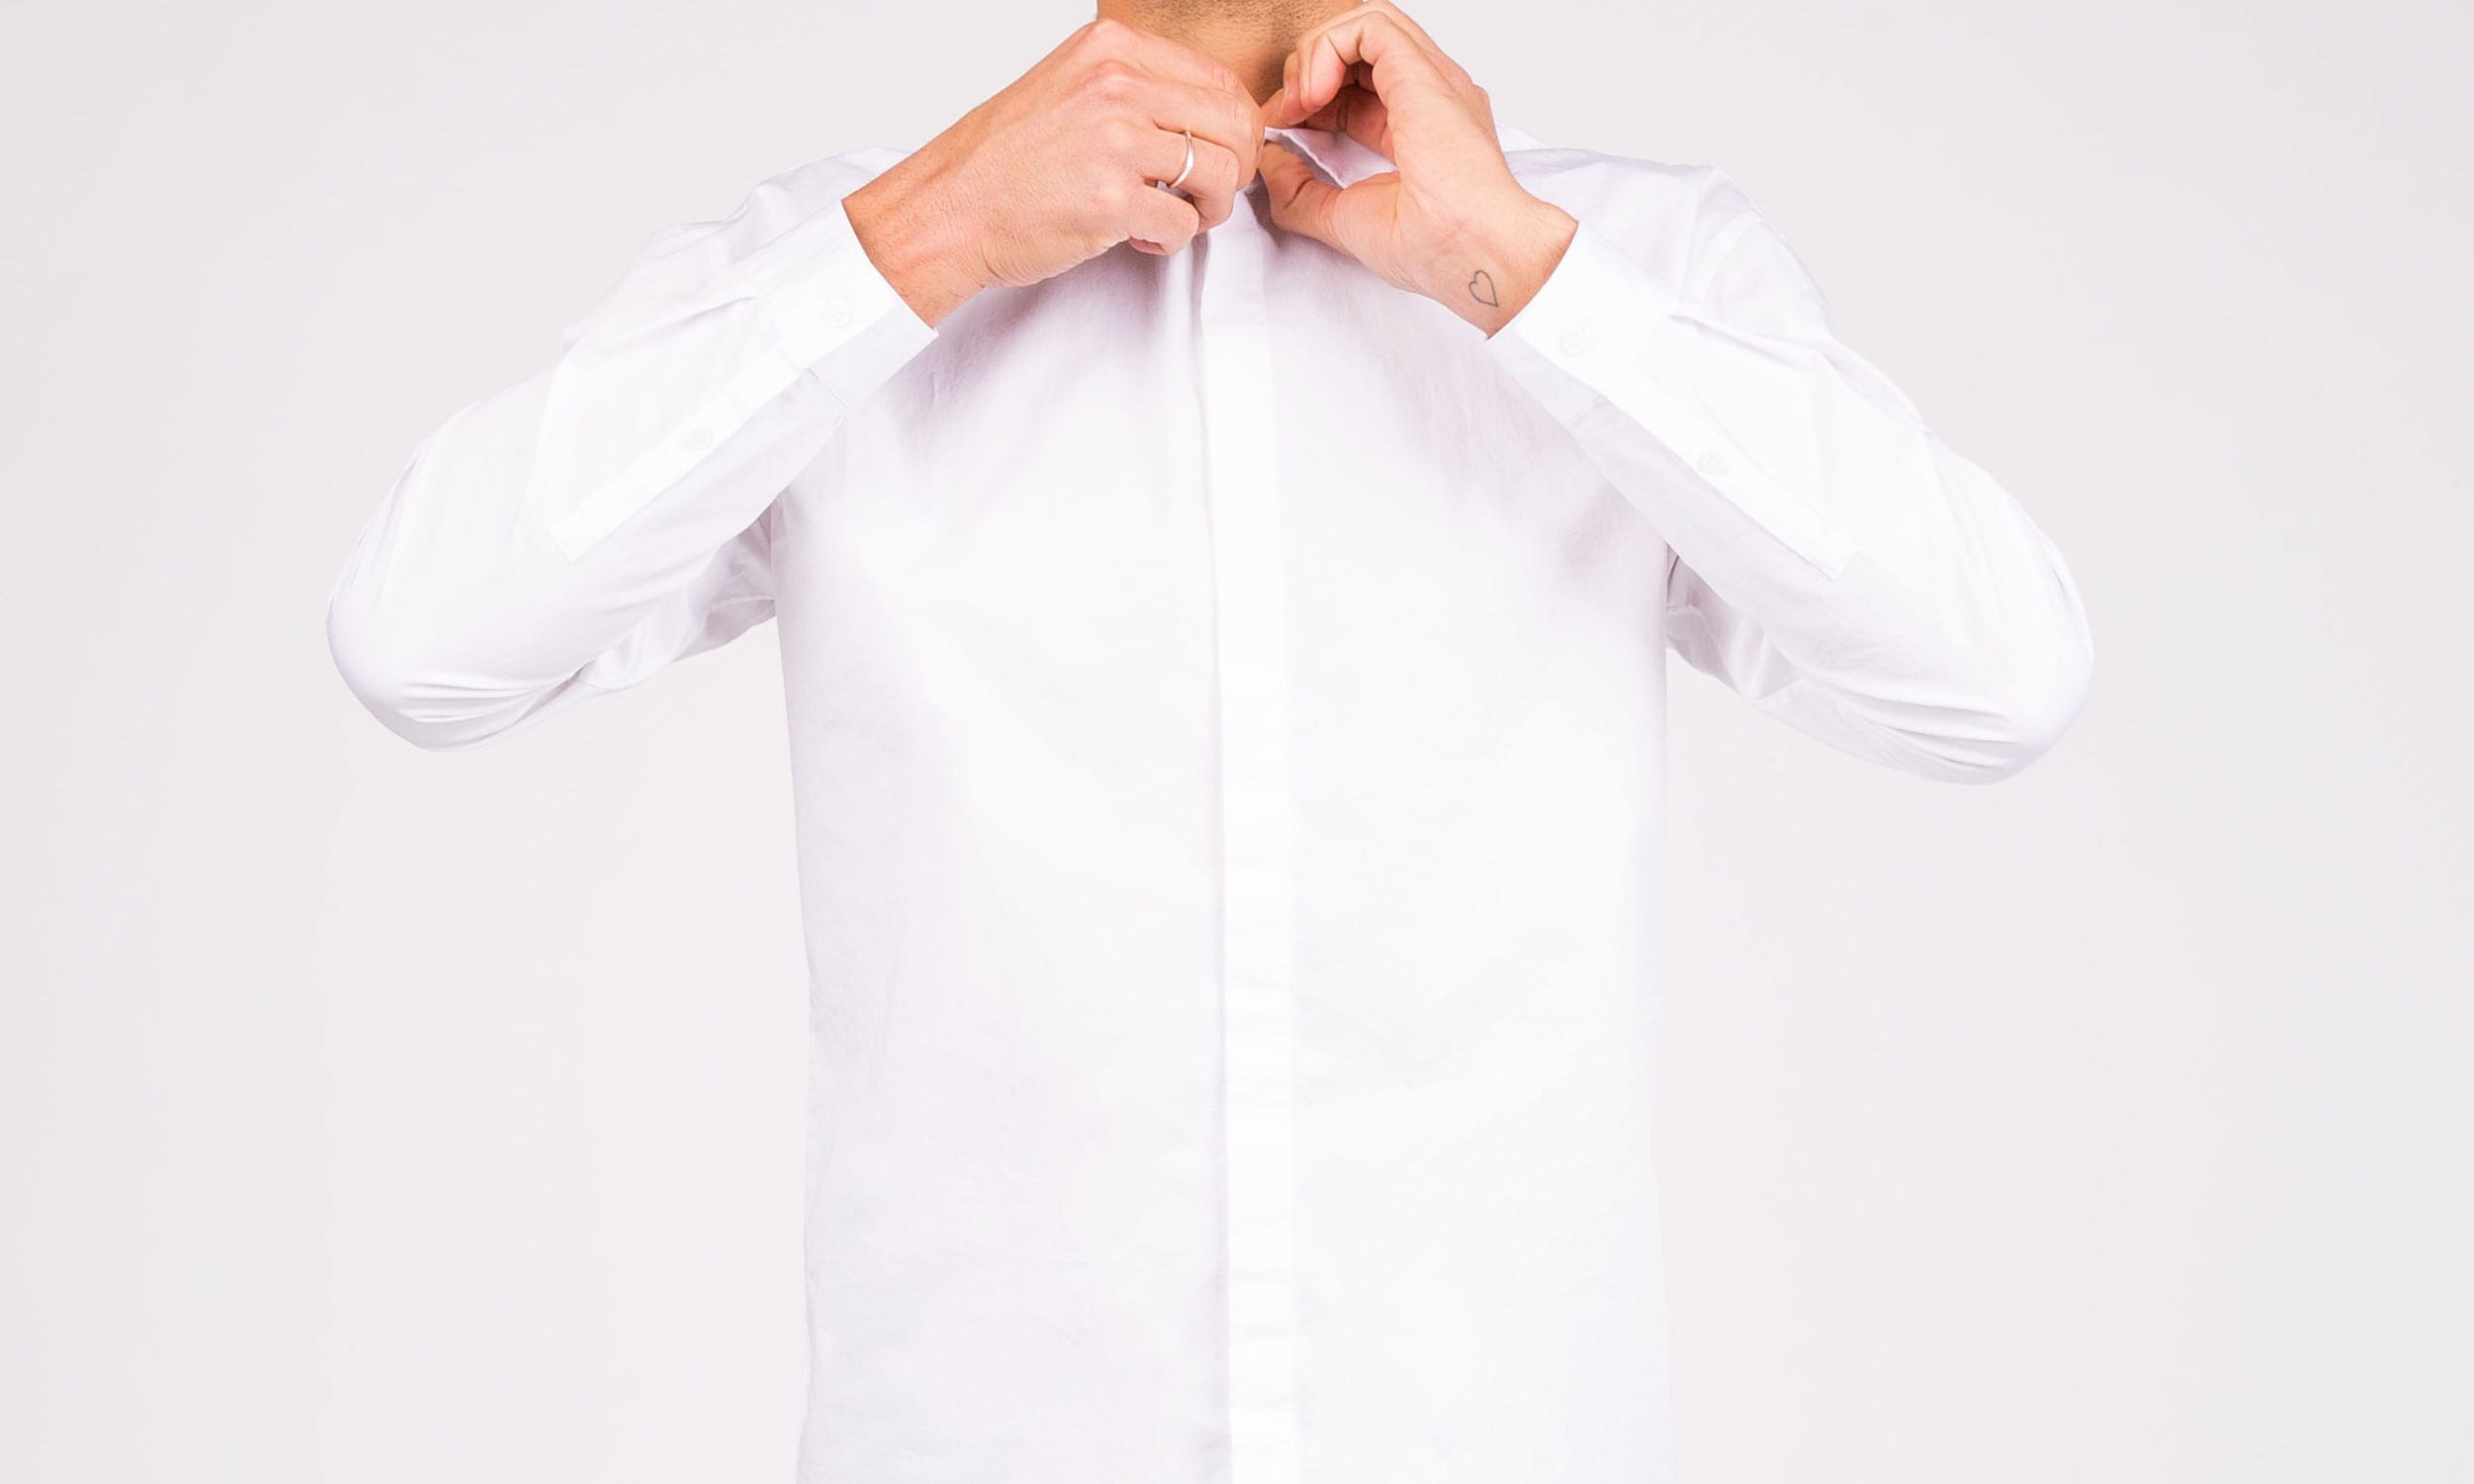 How to Pack Dress Shirts Without Wrinkling